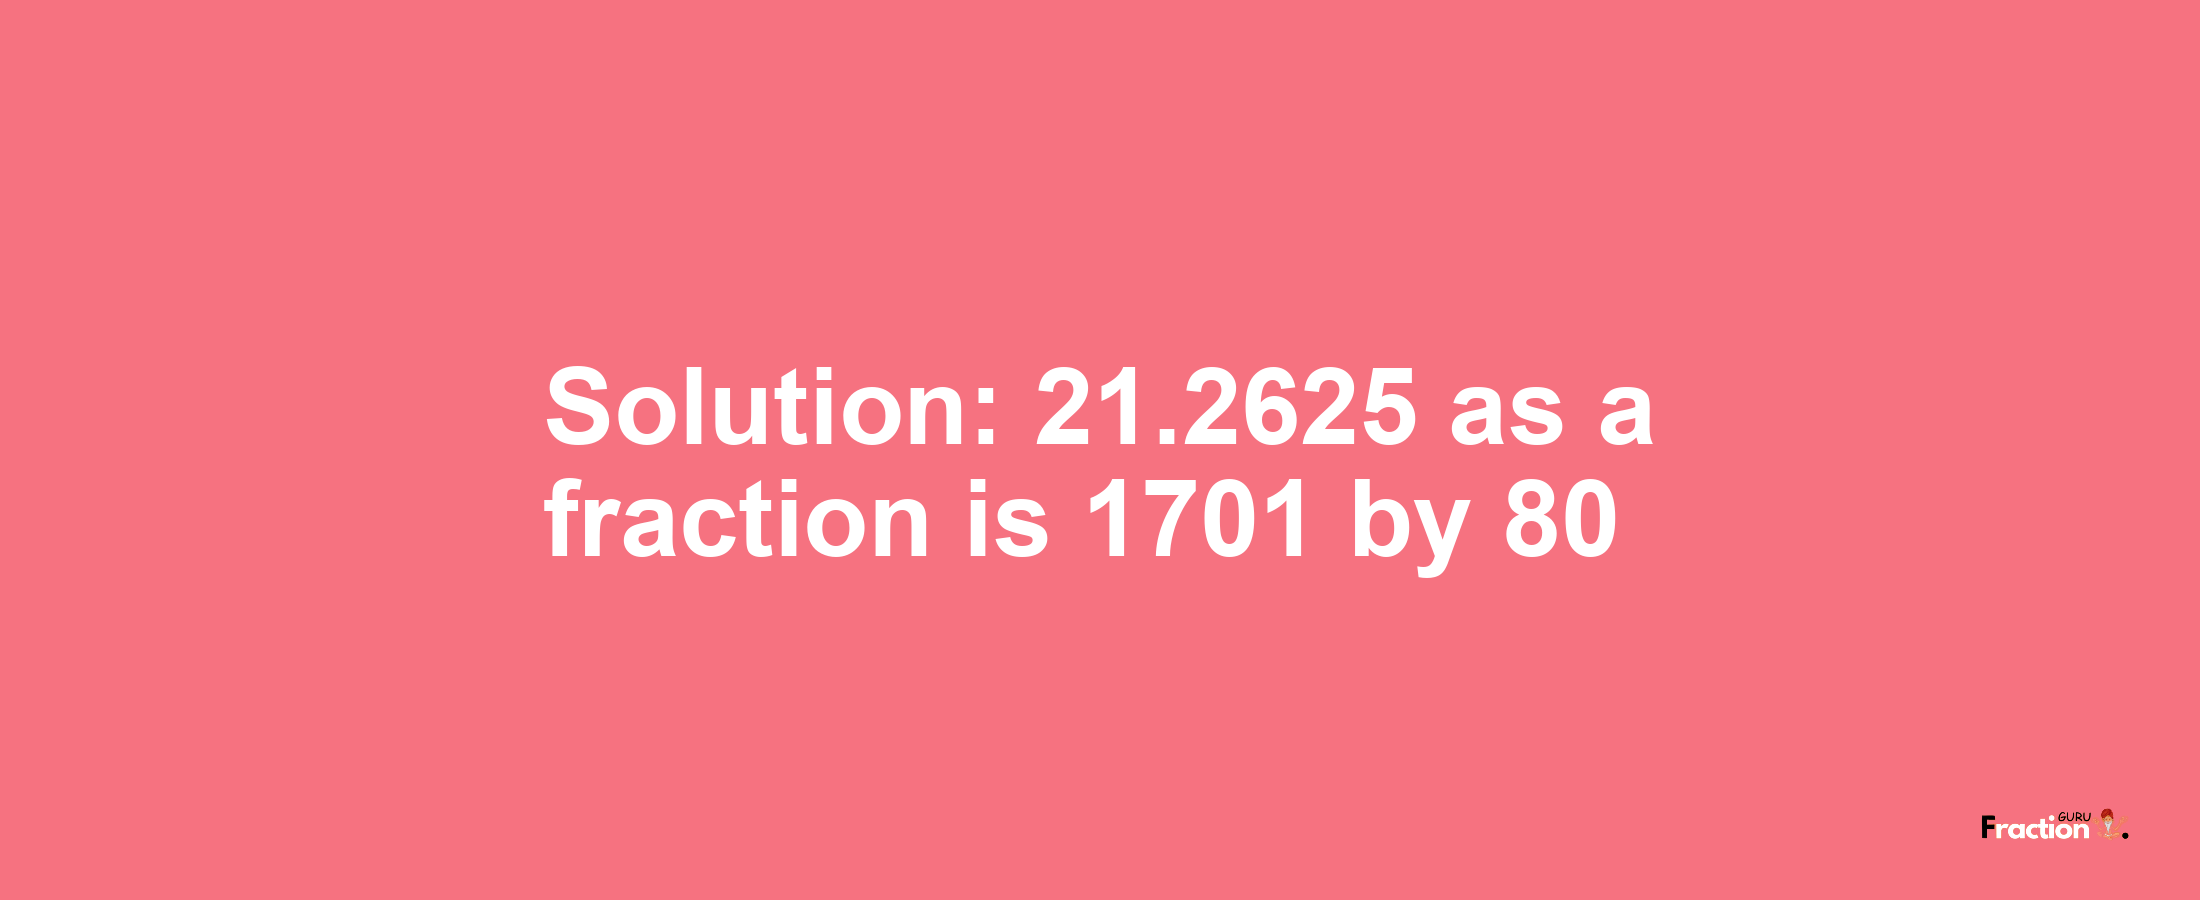 Solution:21.2625 as a fraction is 1701/80